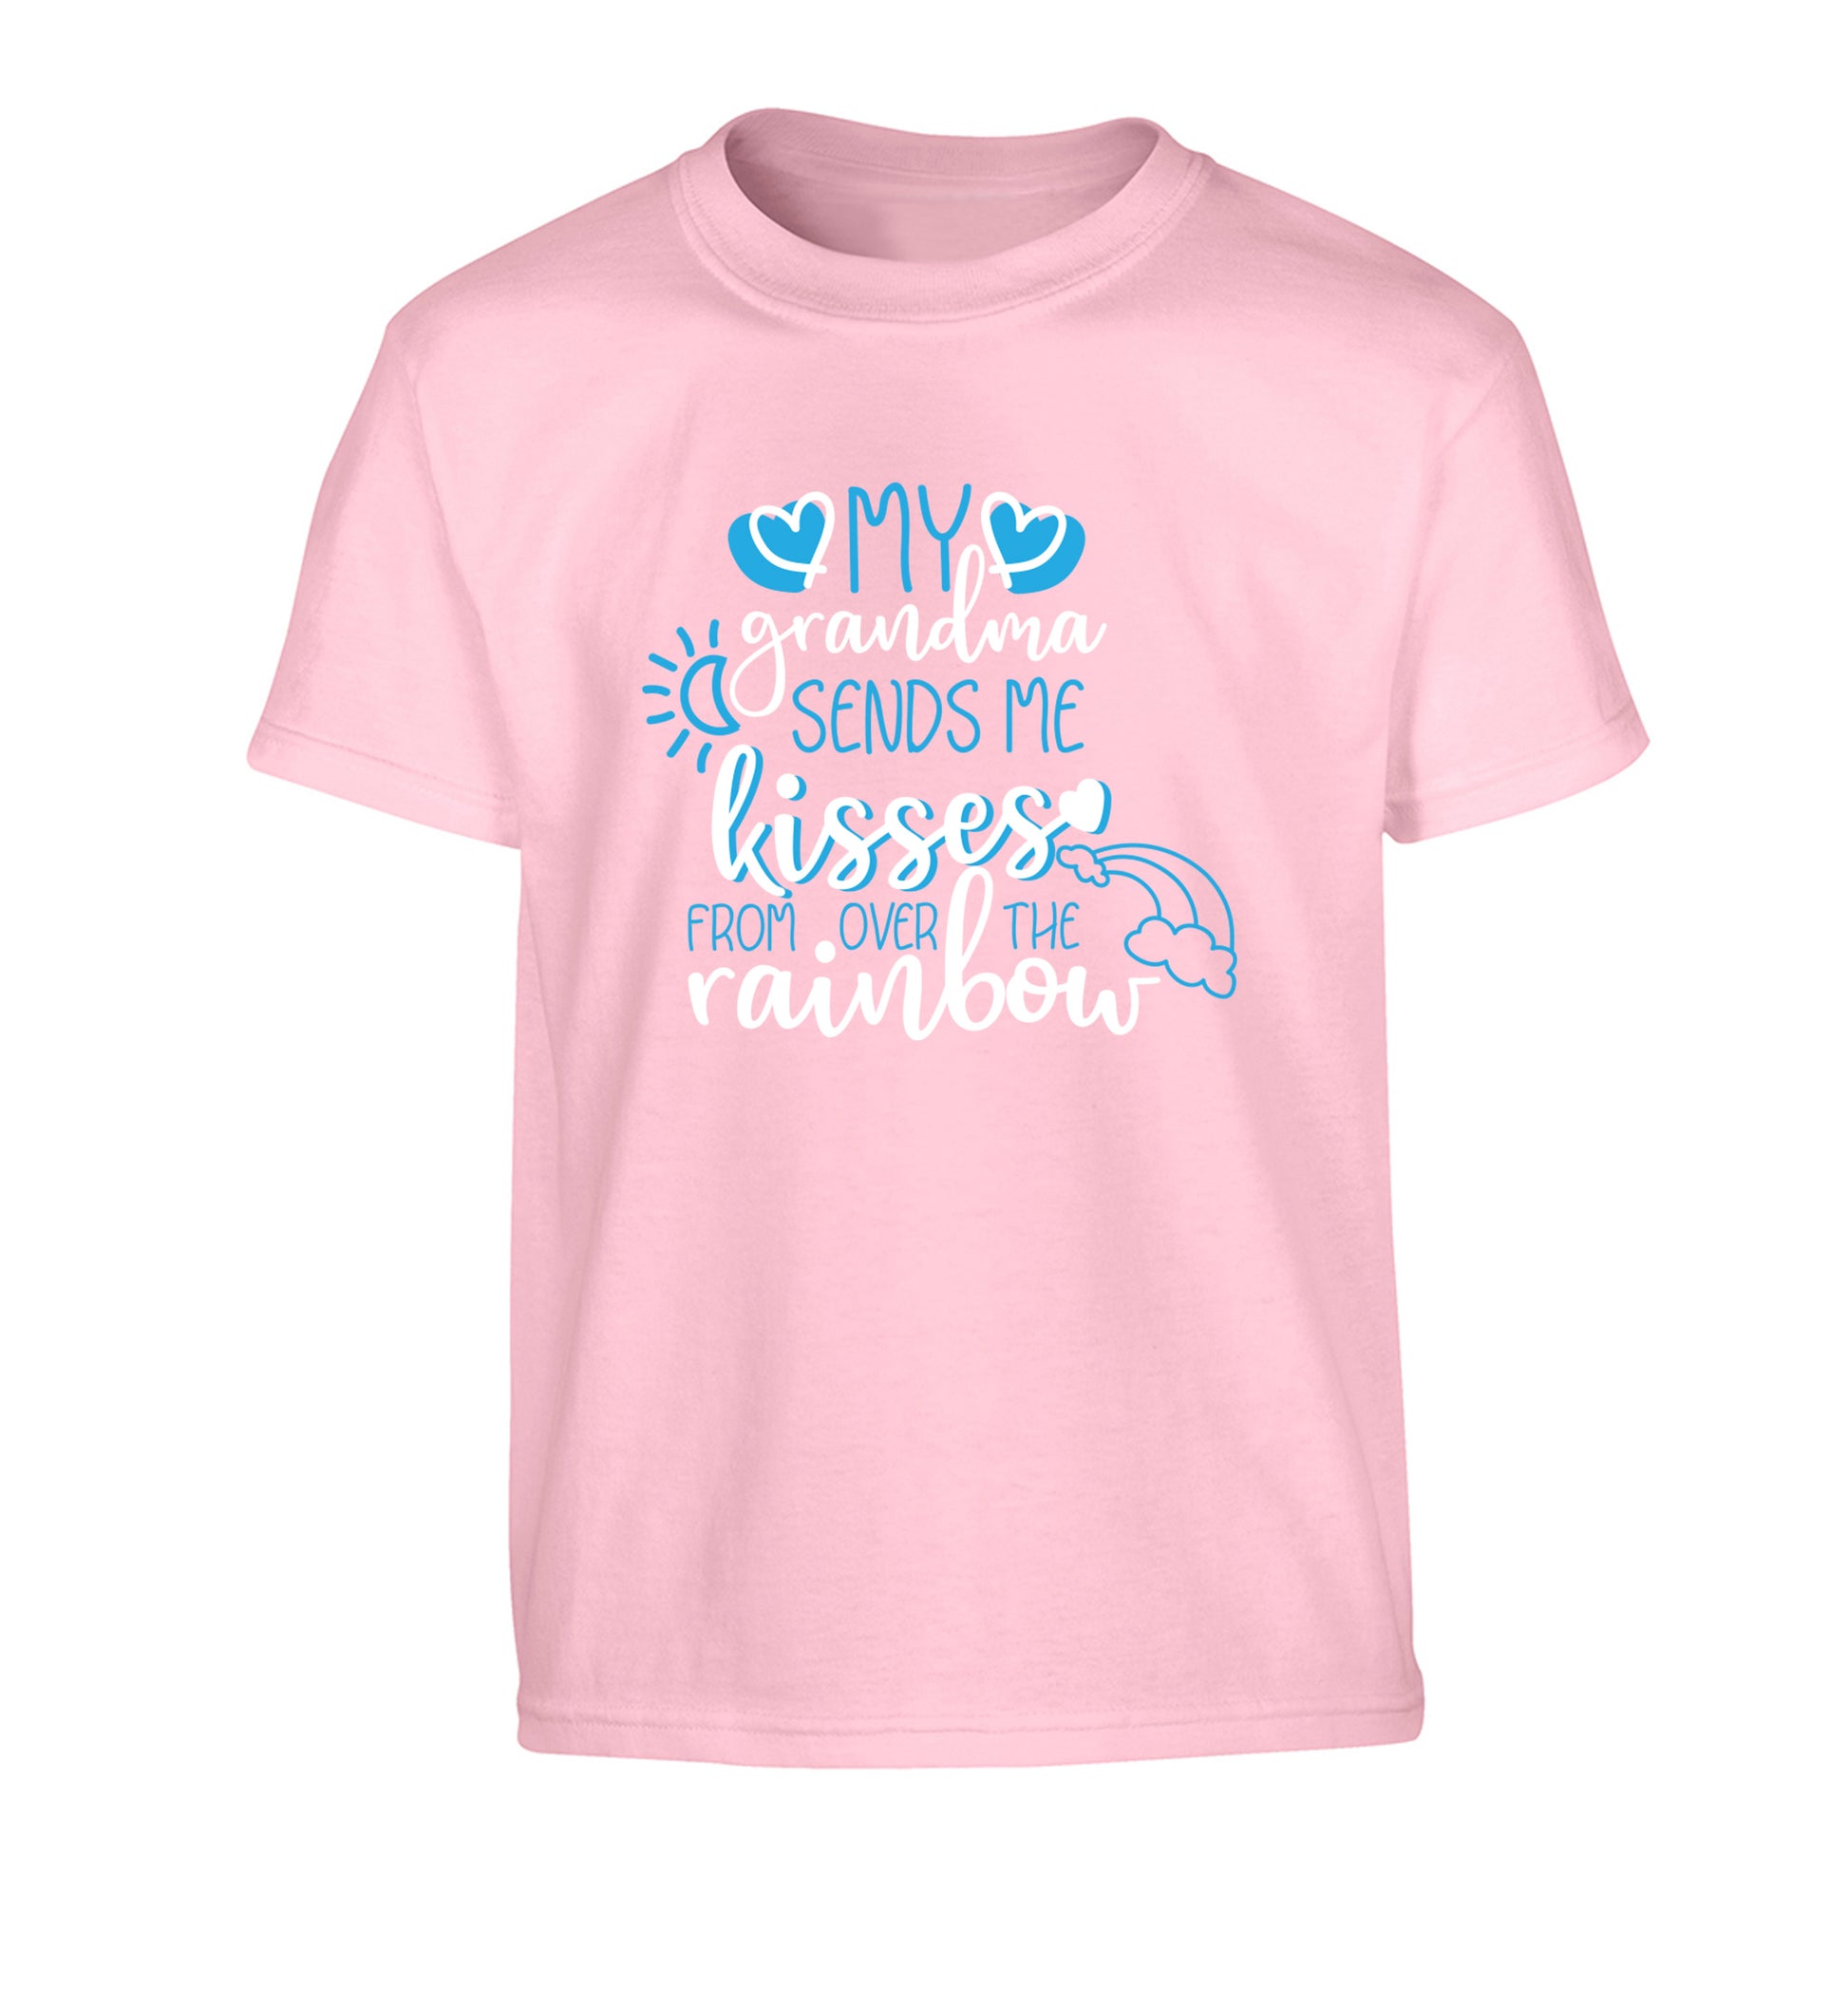 My grandma sends me kisses from over the rainbow Children's light pink Tshirt 12-13 Years